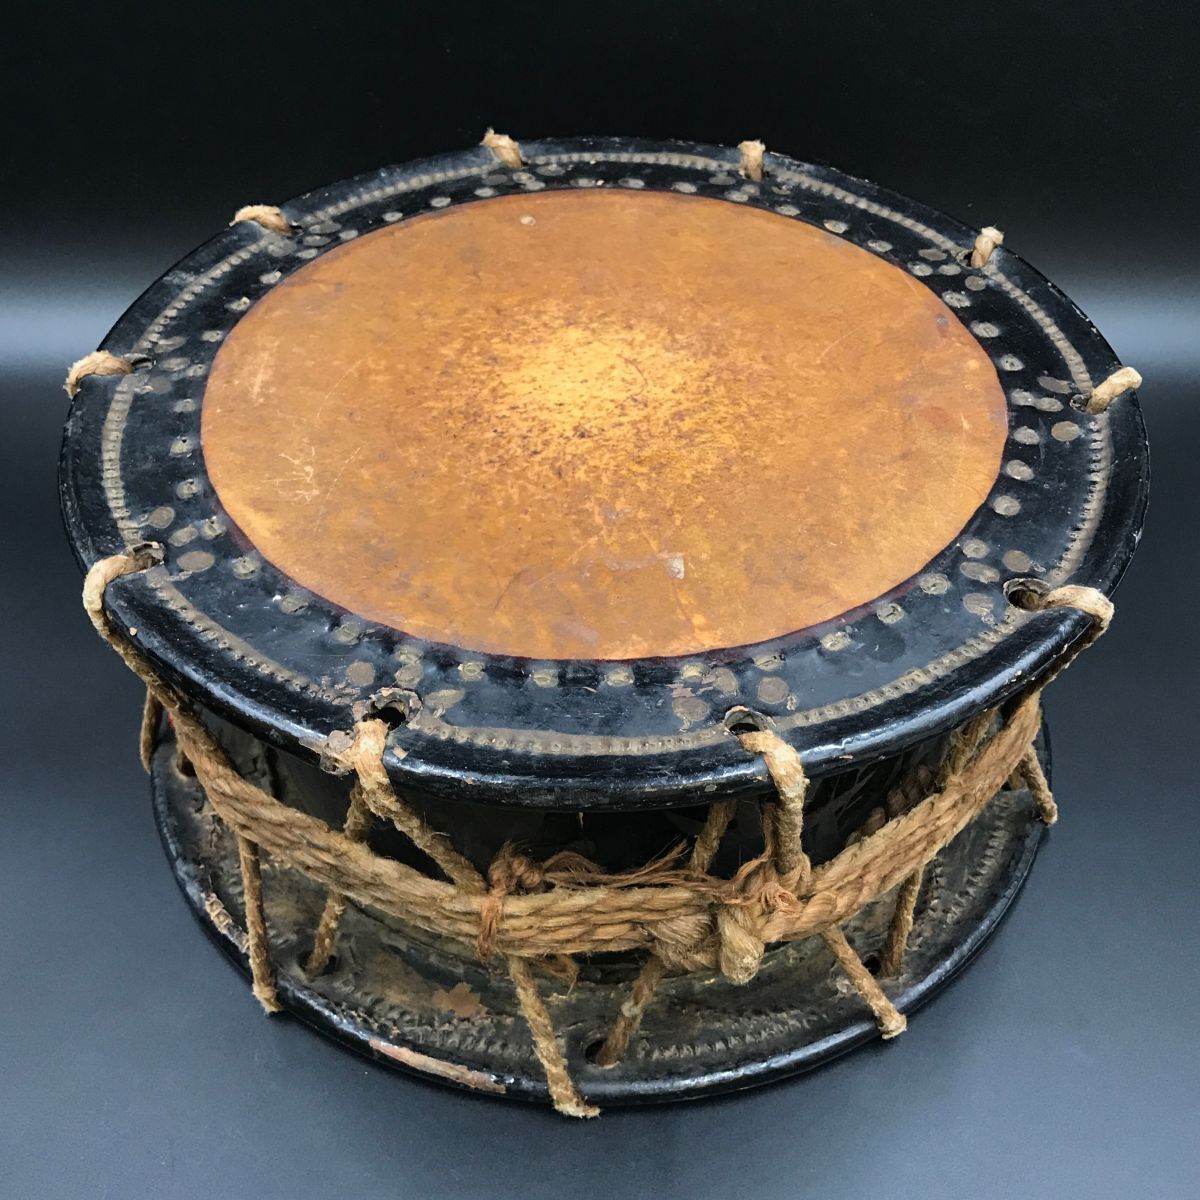  old Japanese drum 2 point together era traditional Japanese musical instrument . futoshi hand drum [309-064#140]